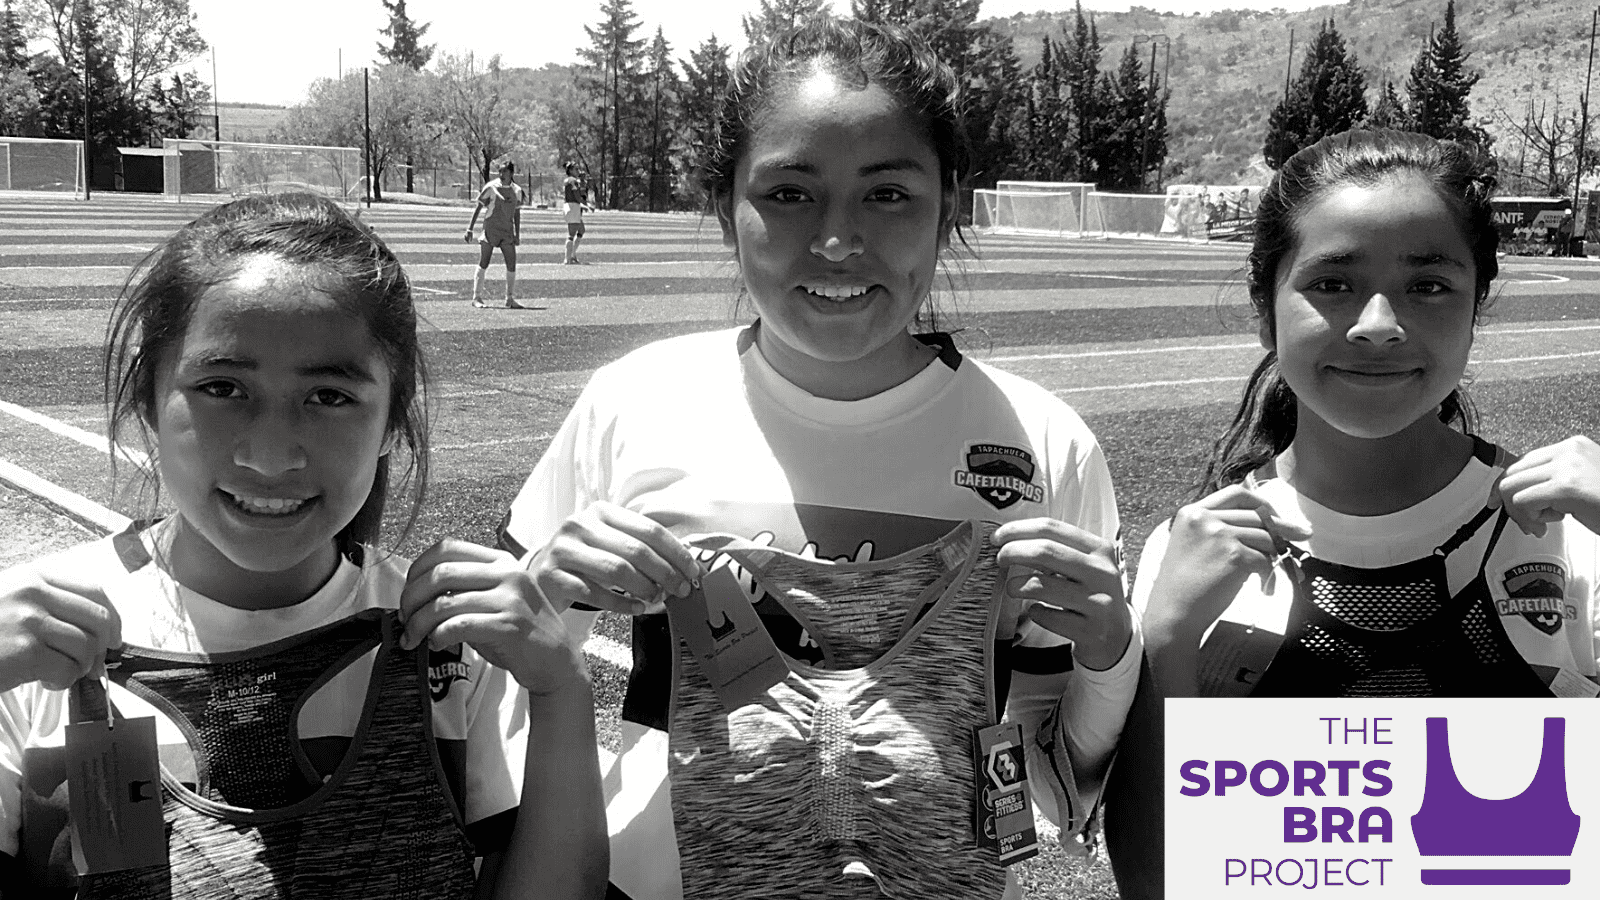 Players with Gonzo Soccer in Mexico receive a shipment of bras in April 2018. Photo by The Sports Bra Project